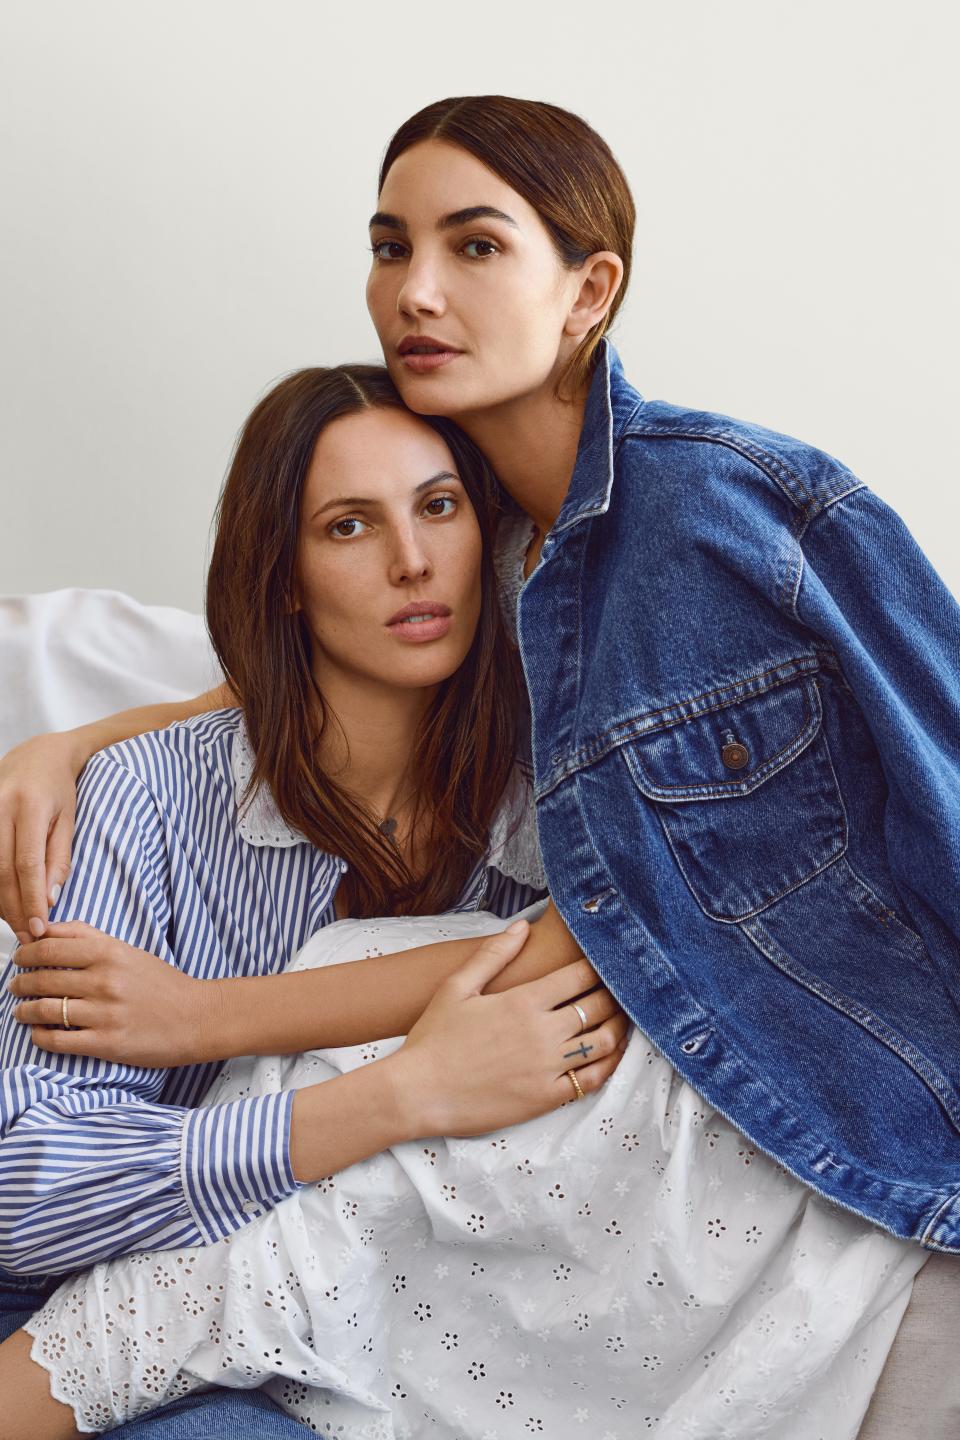 Lily and Ruby Aldridge wear Doen for Gap in front of a plain backdrop